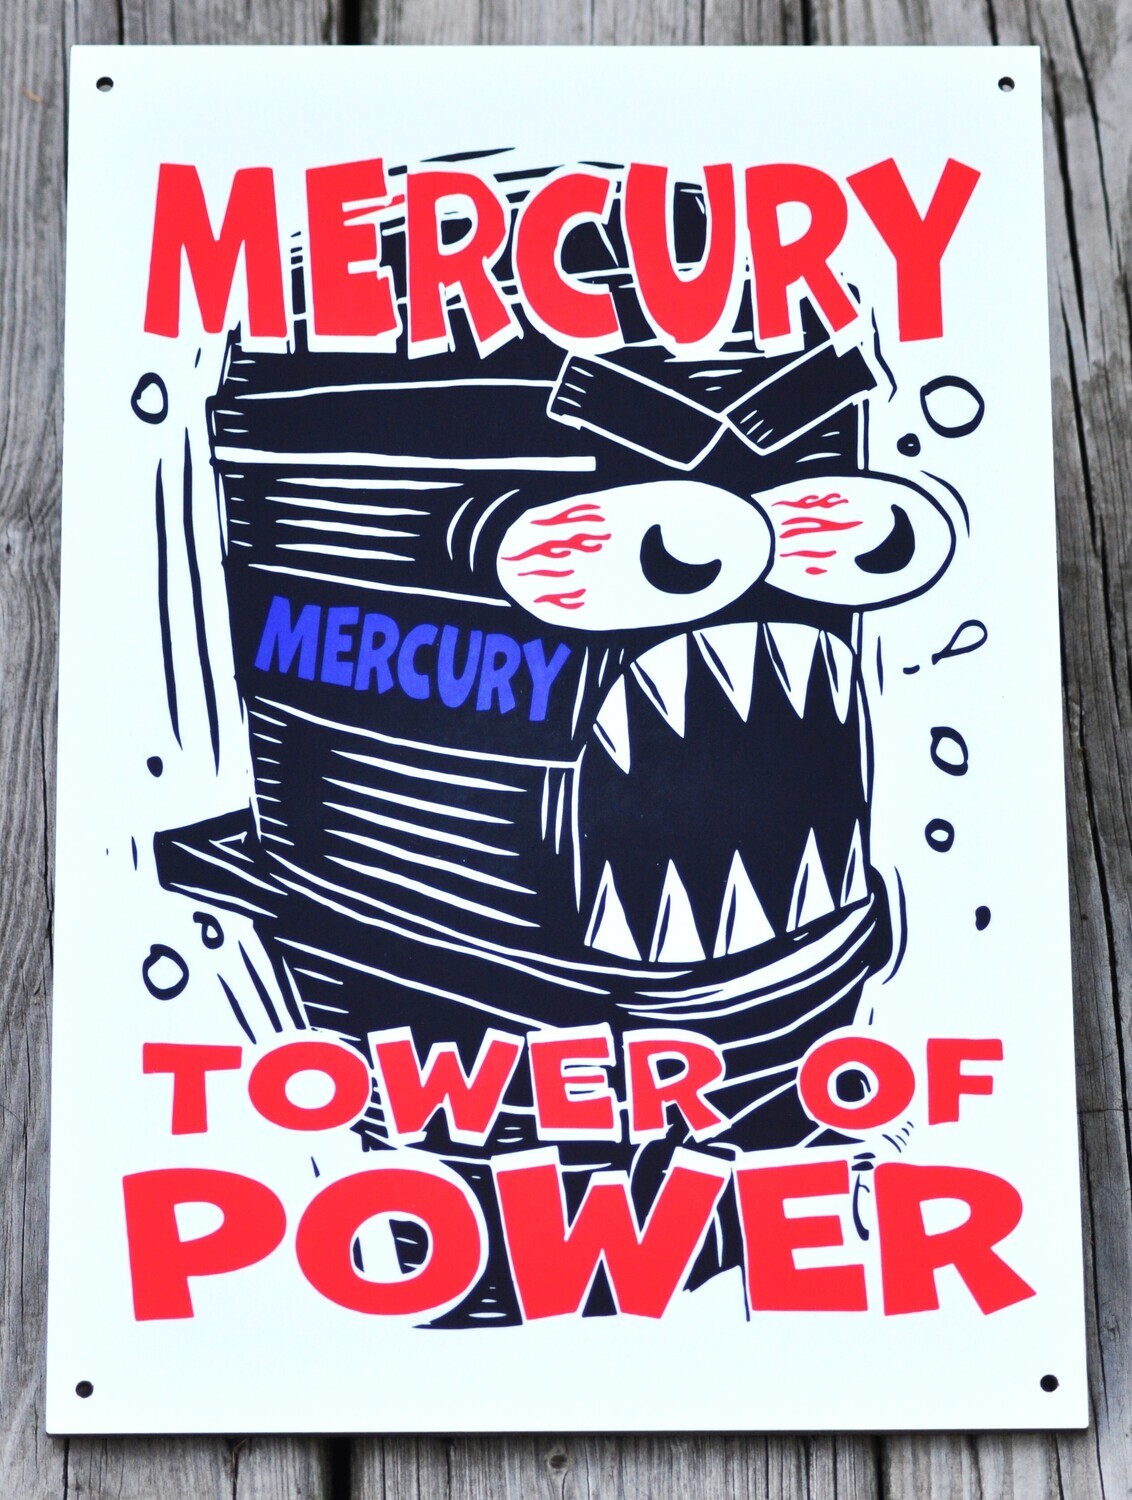 MERCURY"TOWER OF POWER" sign